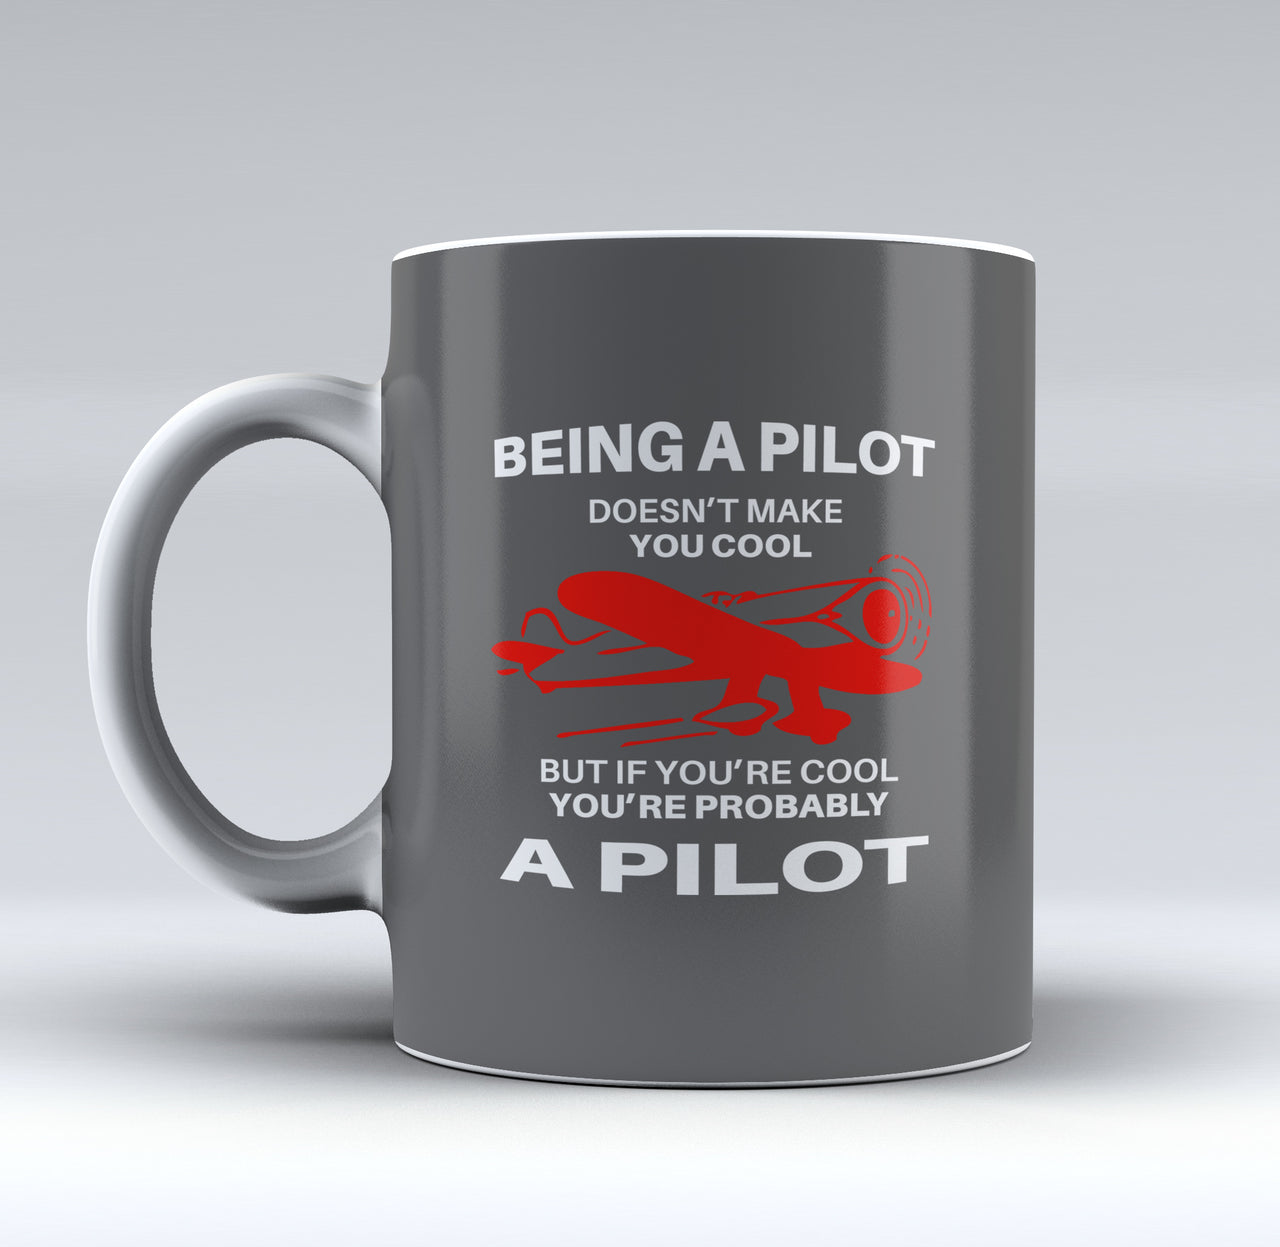 If You're Cool You're Probably a Pilot Designed Mugs